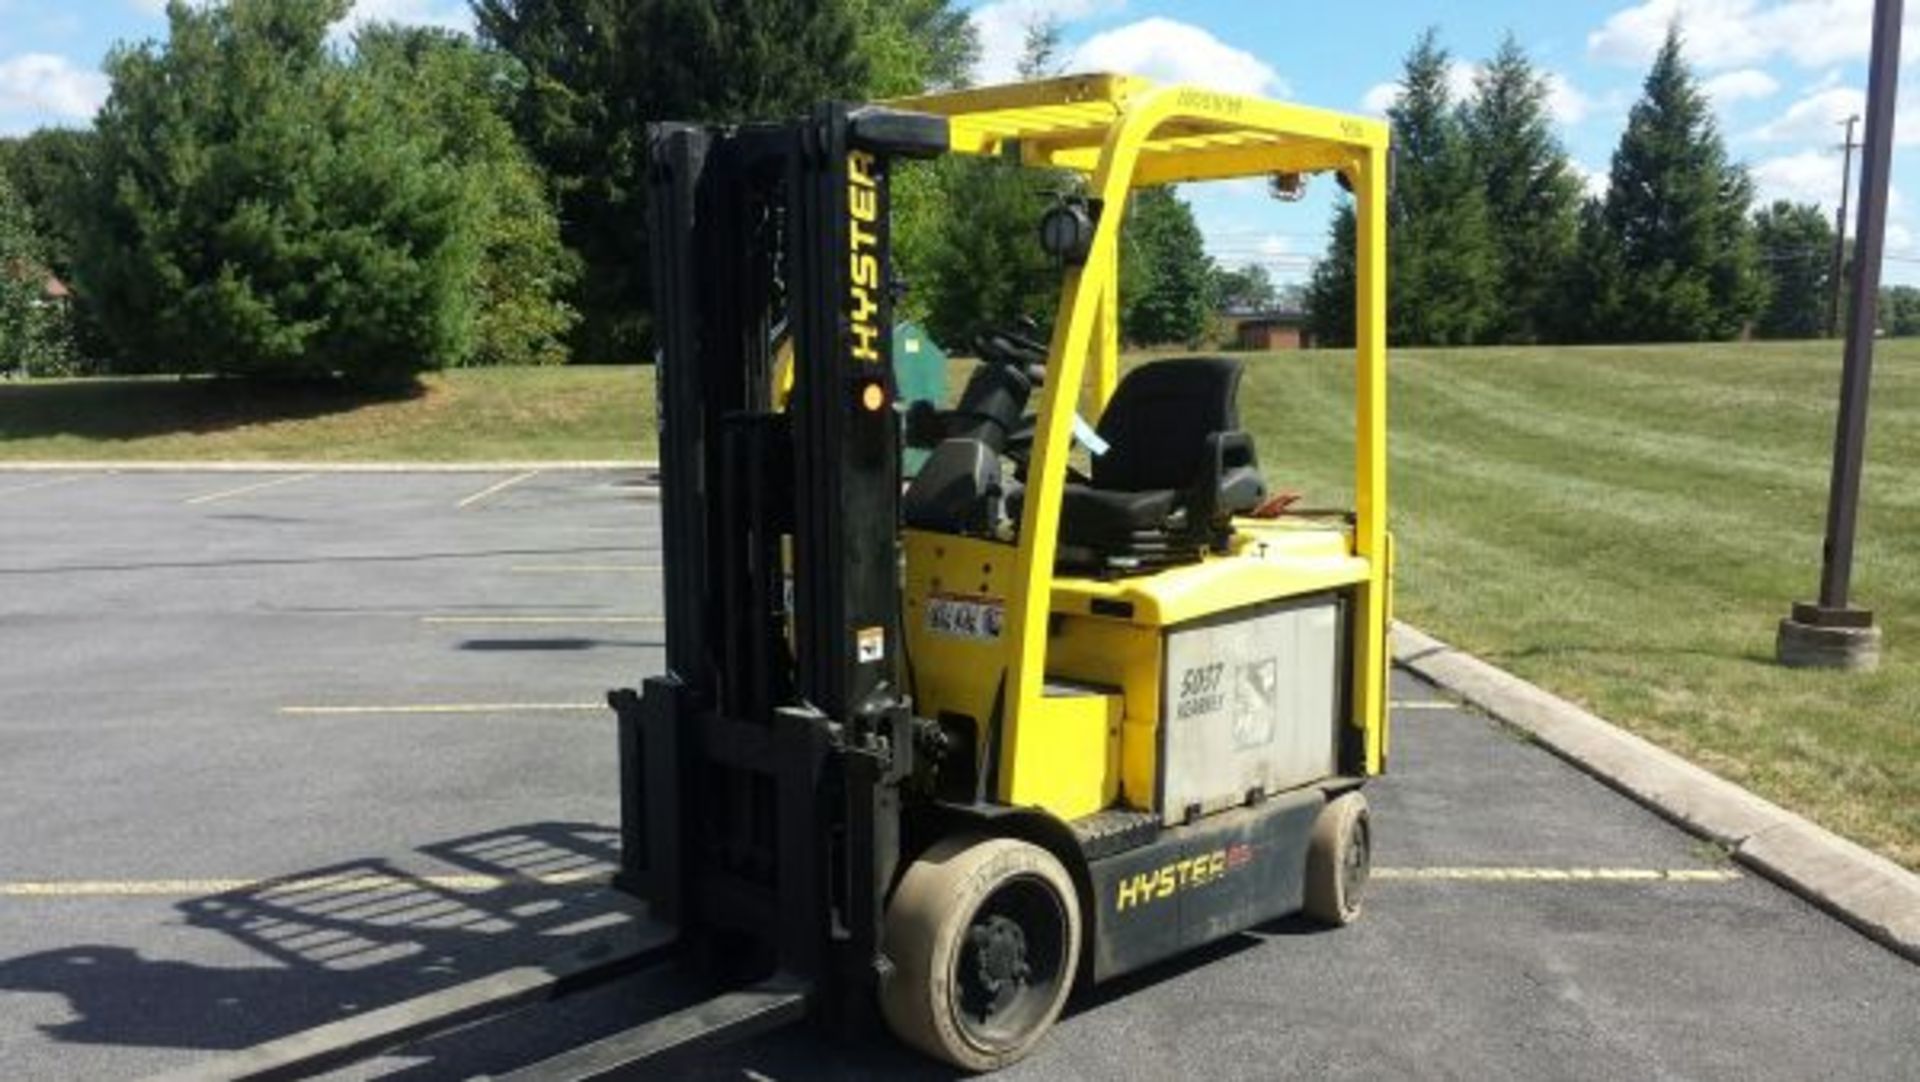 6,500 LB HYSTER MODEL E65XN-40 ELECTRIC SIT DOWN LIFT TRUCK; S/N A268N02166G, 188" LIFT HEIGHT - Image 4 of 4